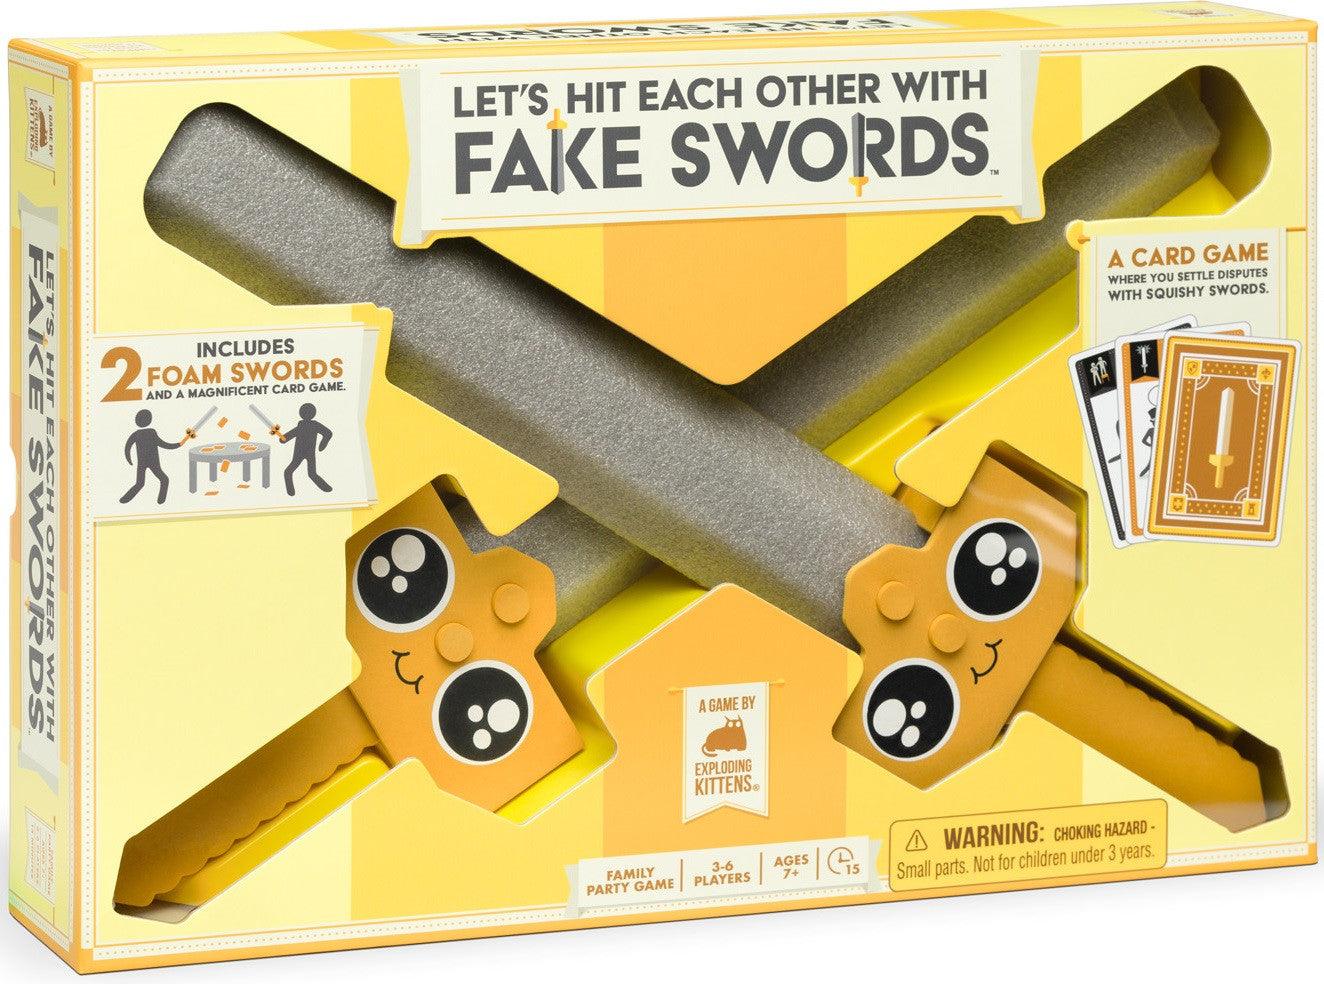 Let's Hit Each Other With Fake Swords by Exploding Kittens (large box)